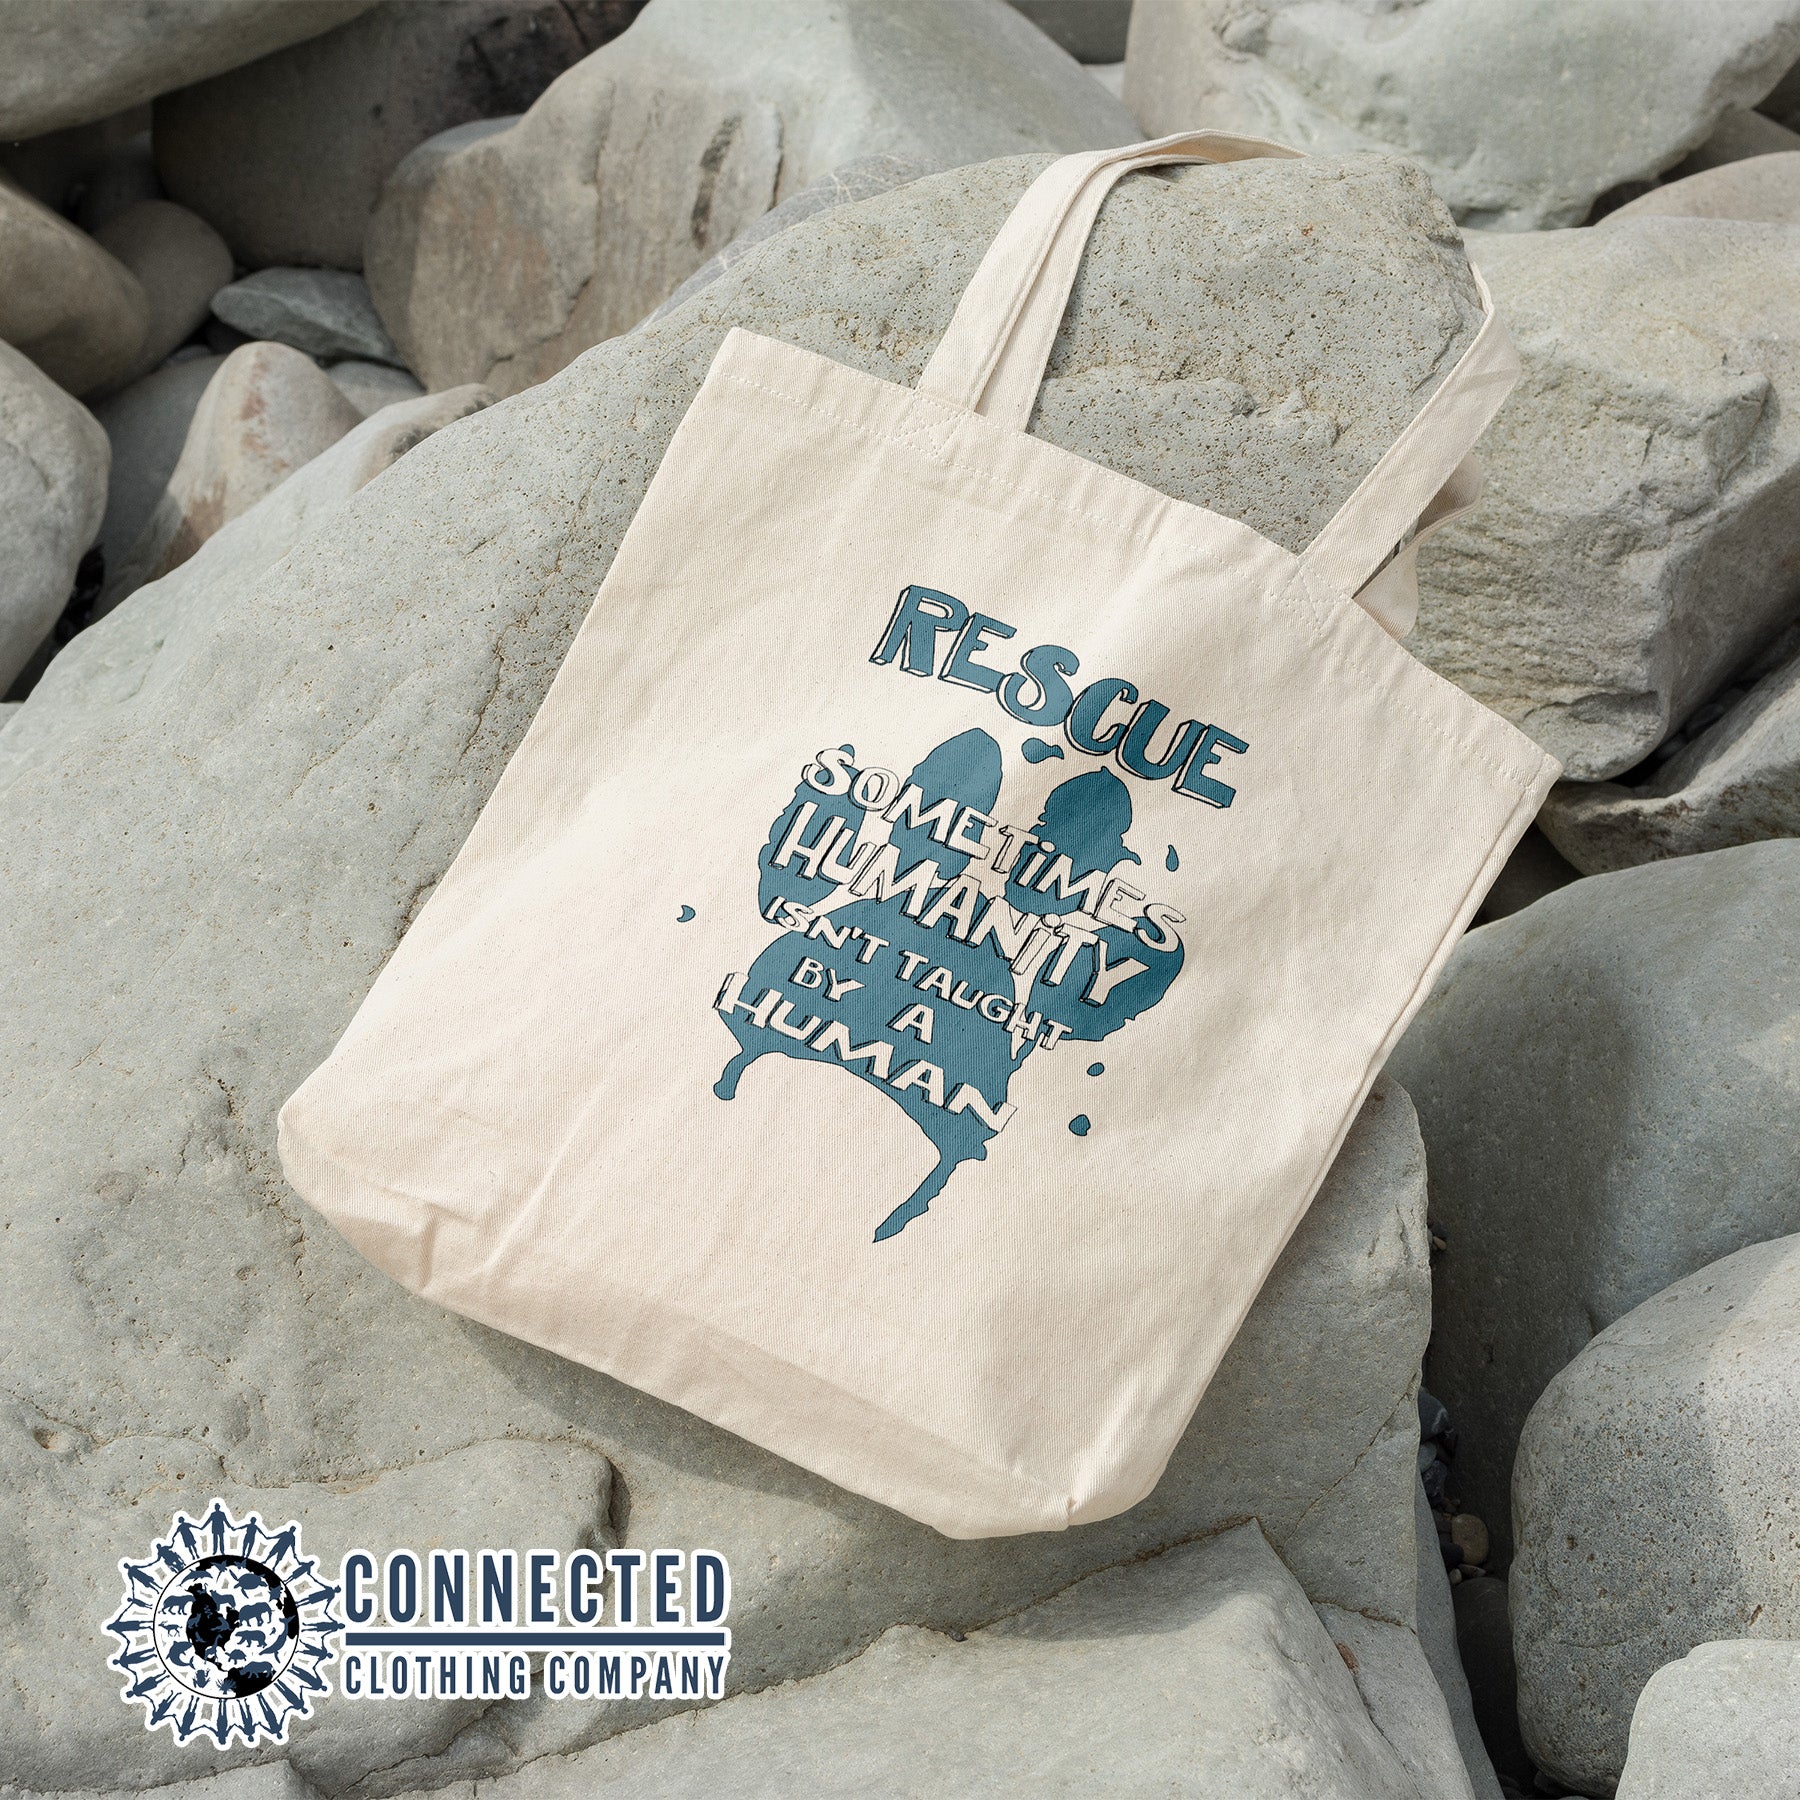 Rescue Humanity Tote Bag - Connected Clothing Company - 10% of proceeds donated to animal rescue